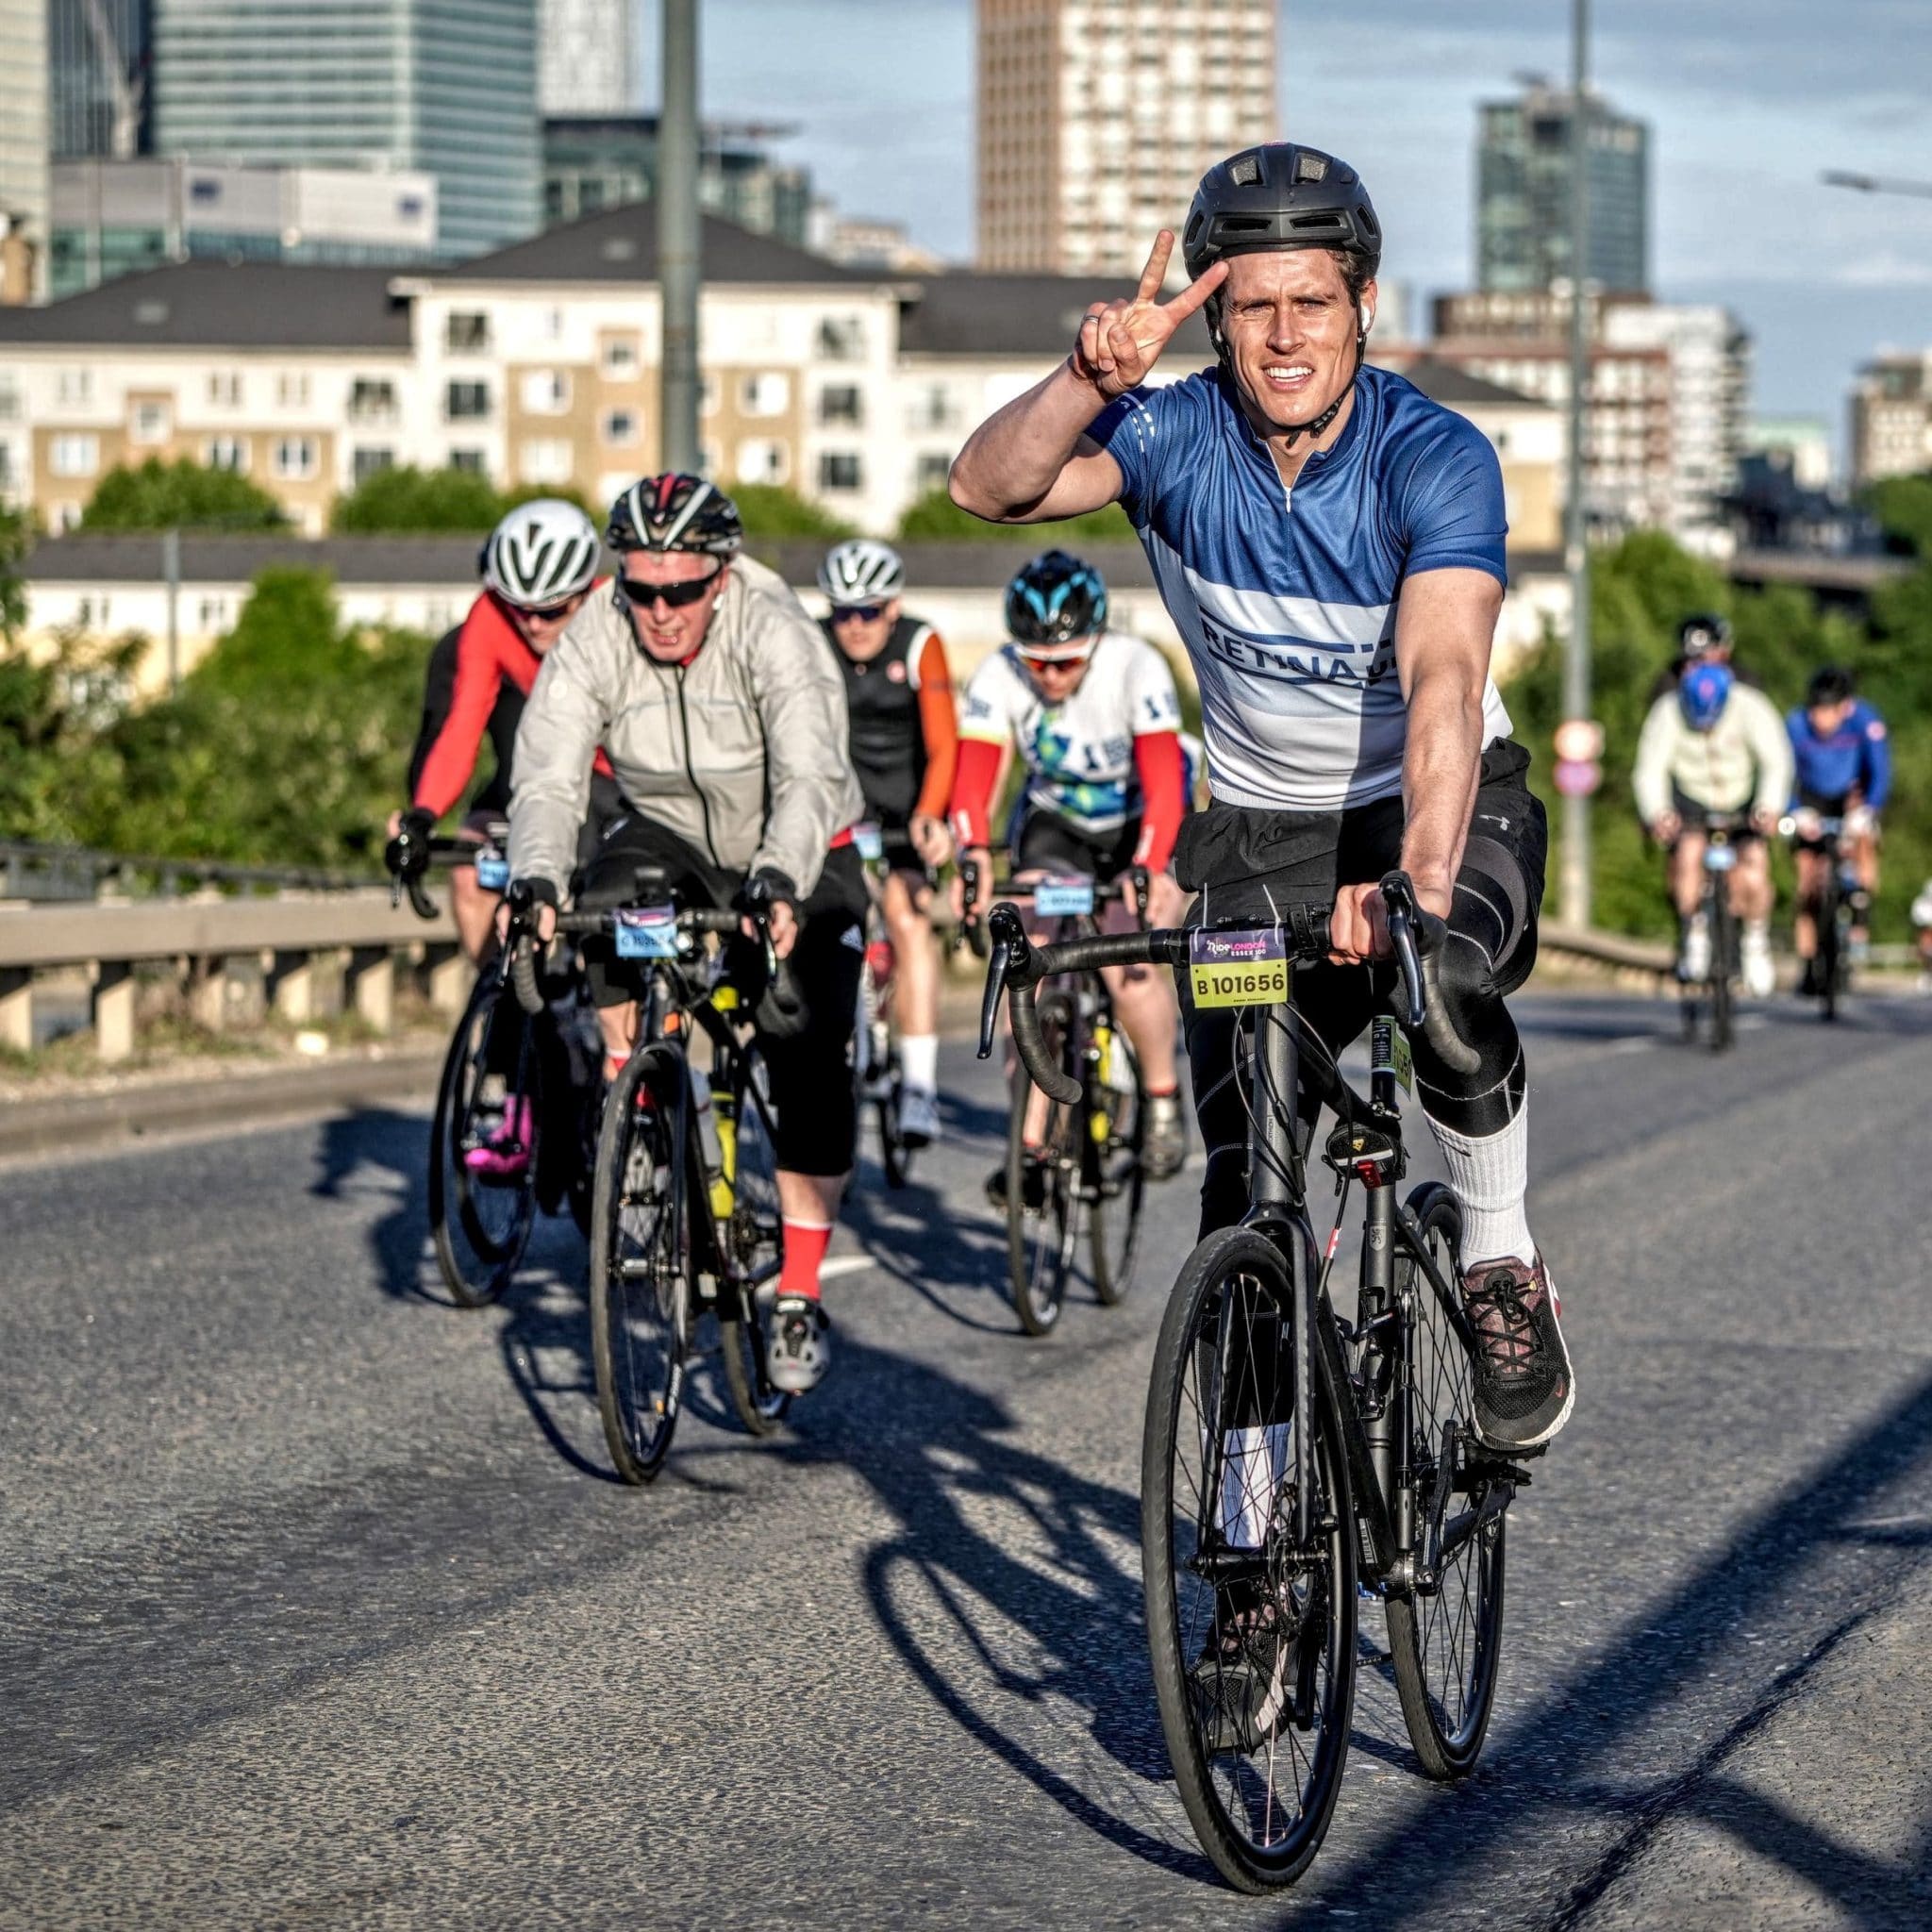 Image shows a cyclist in a blue cycling jersey with 'Retina UK' on the front. He is cycling on a closed road with other cyclists and London buildings in the background.